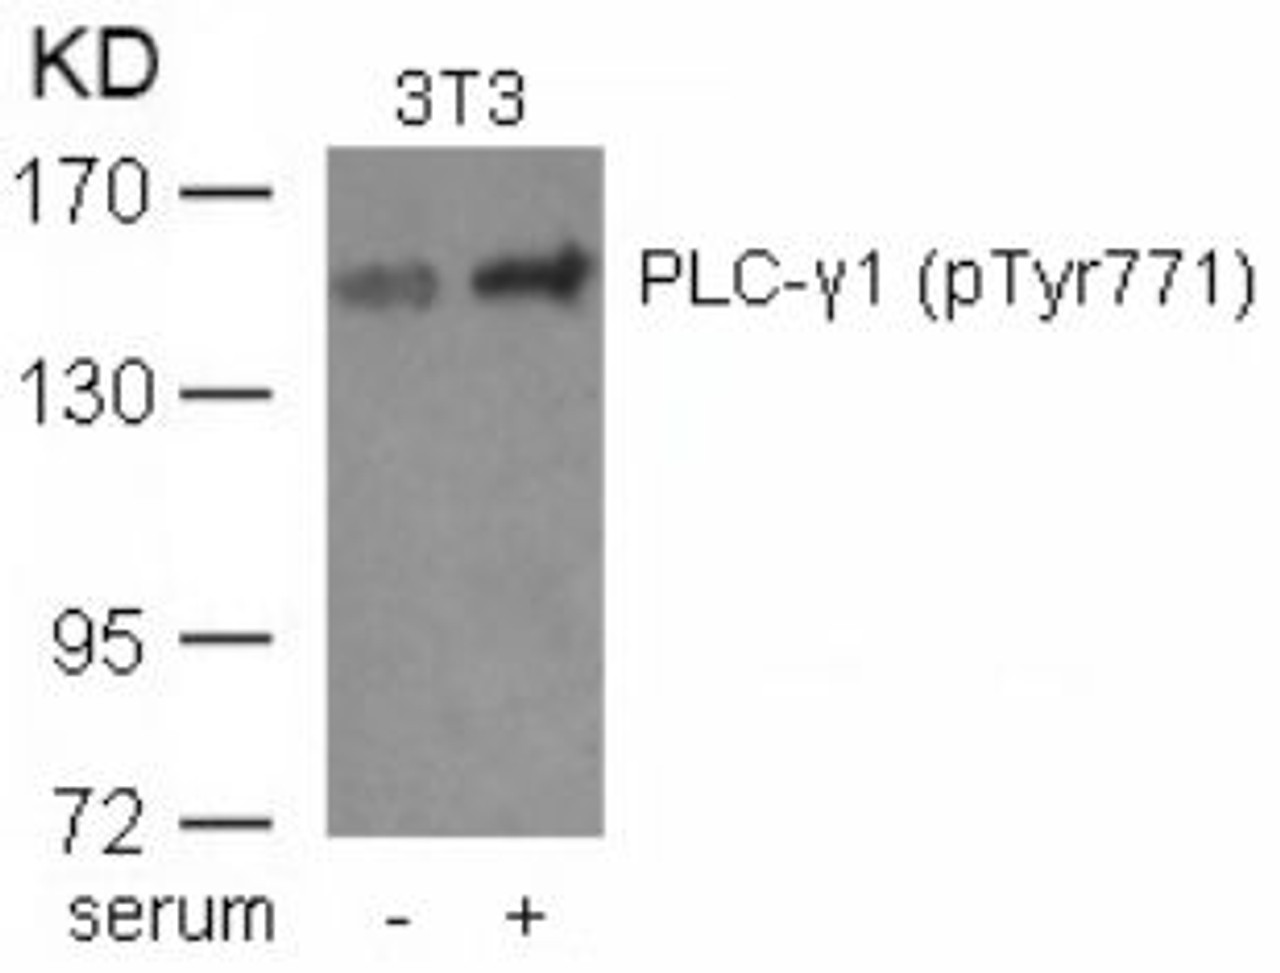 Western blot analysis of lysed extracts from 3T3 cells untreated or treated with serum using PLC-&#947;1 (phospho-Tyr771) .